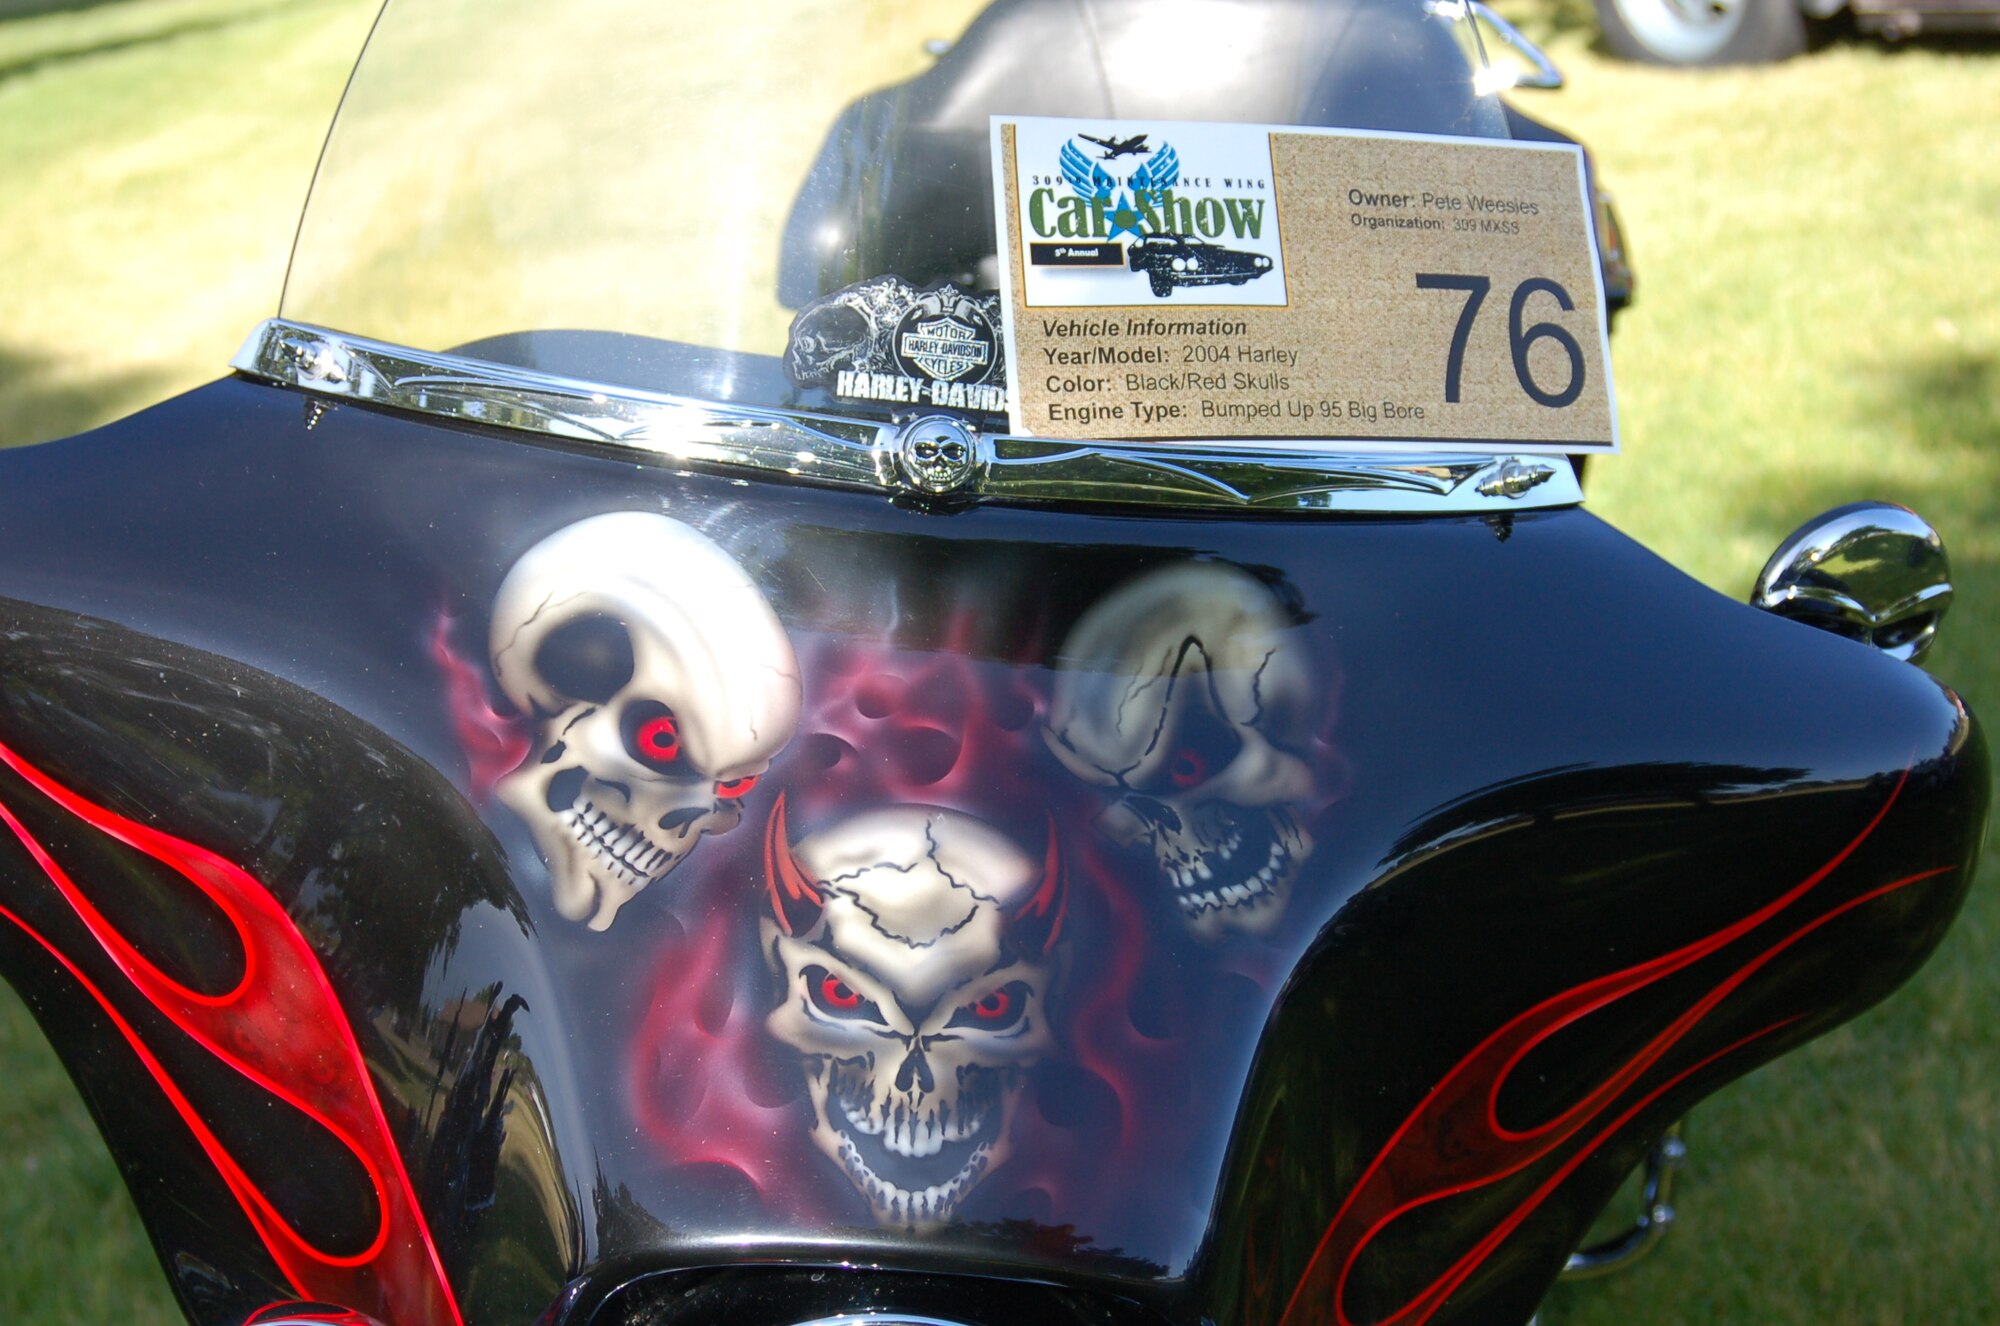 Skulls and flames adorn the front of Pete Weesie's 2005 Harley Davidson. (U.S. Air Force photo by Bill Orndorff)